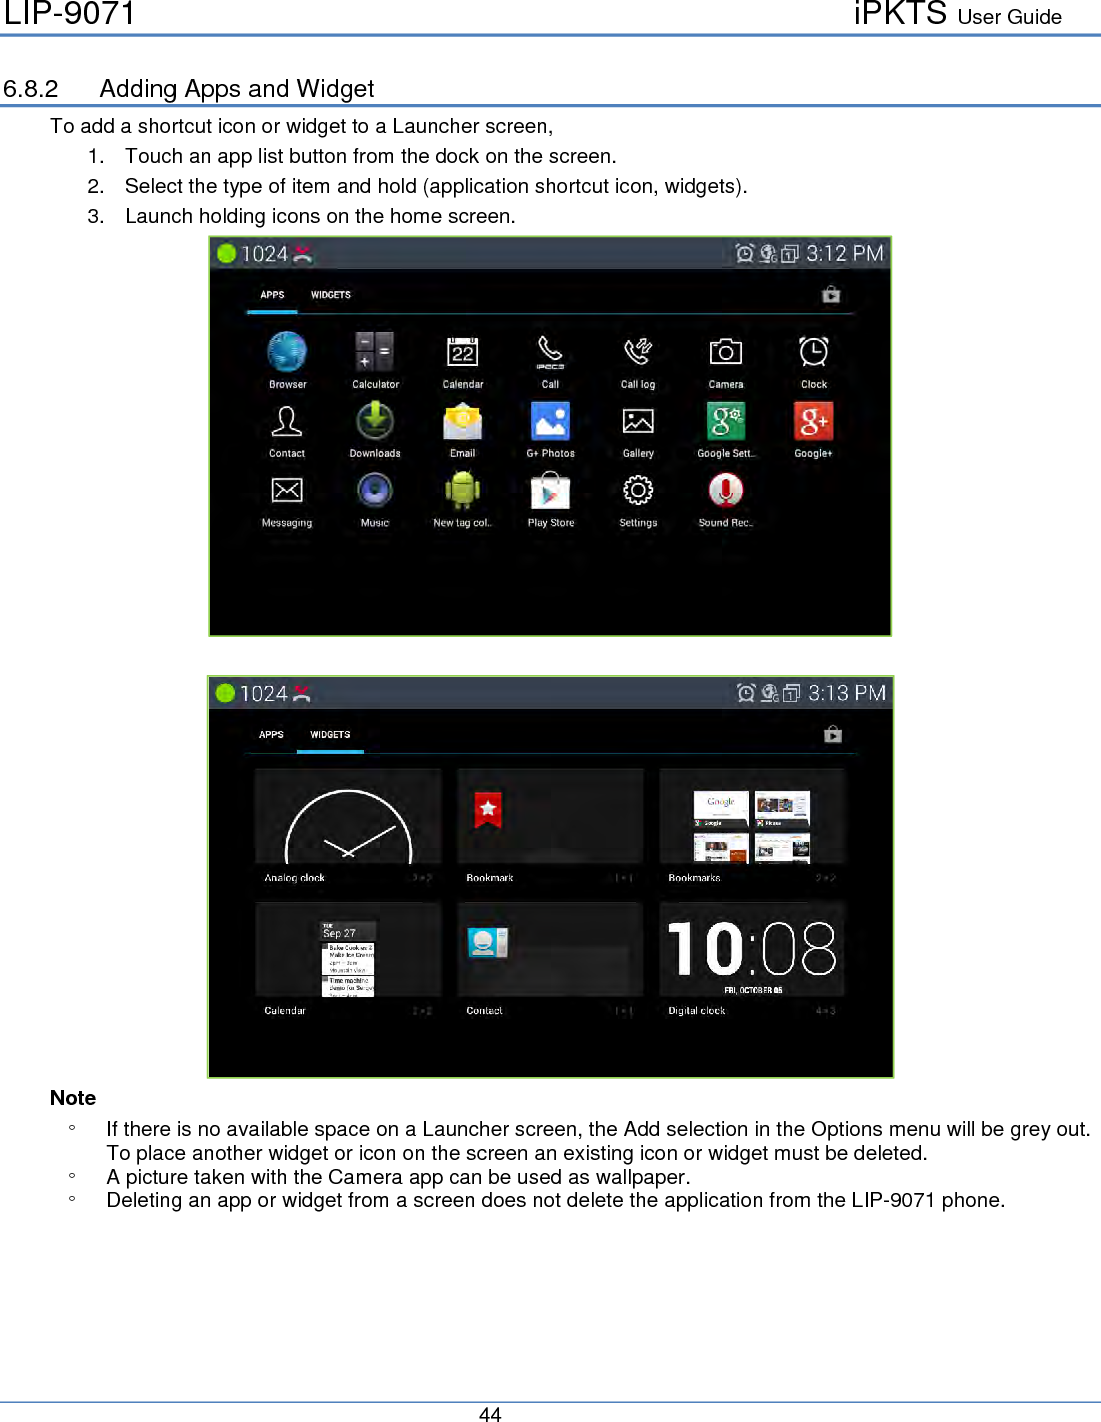 LIP-9071     iPKTS User Guide      44   6.8.2 Adding Apps and Widget To add a shortcut icon or widget to a Launcher screen, 1. Touch an app list button from the dock on the screen. 2. Select the type of item and hold (application shortcut icon, widgets). 3. Launch holding icons on the home screen.    Note ° If there is no available space on a Launcher screen, the Add selection in the Options menu will be grey out.  To place another widget or icon on the screen an existing icon or widget must be deleted. ° A picture taken with the Camera app can be used as wallpaper.  ° Deleting an app or widget from a screen does not delete the application from the LIP-9071 phone.       